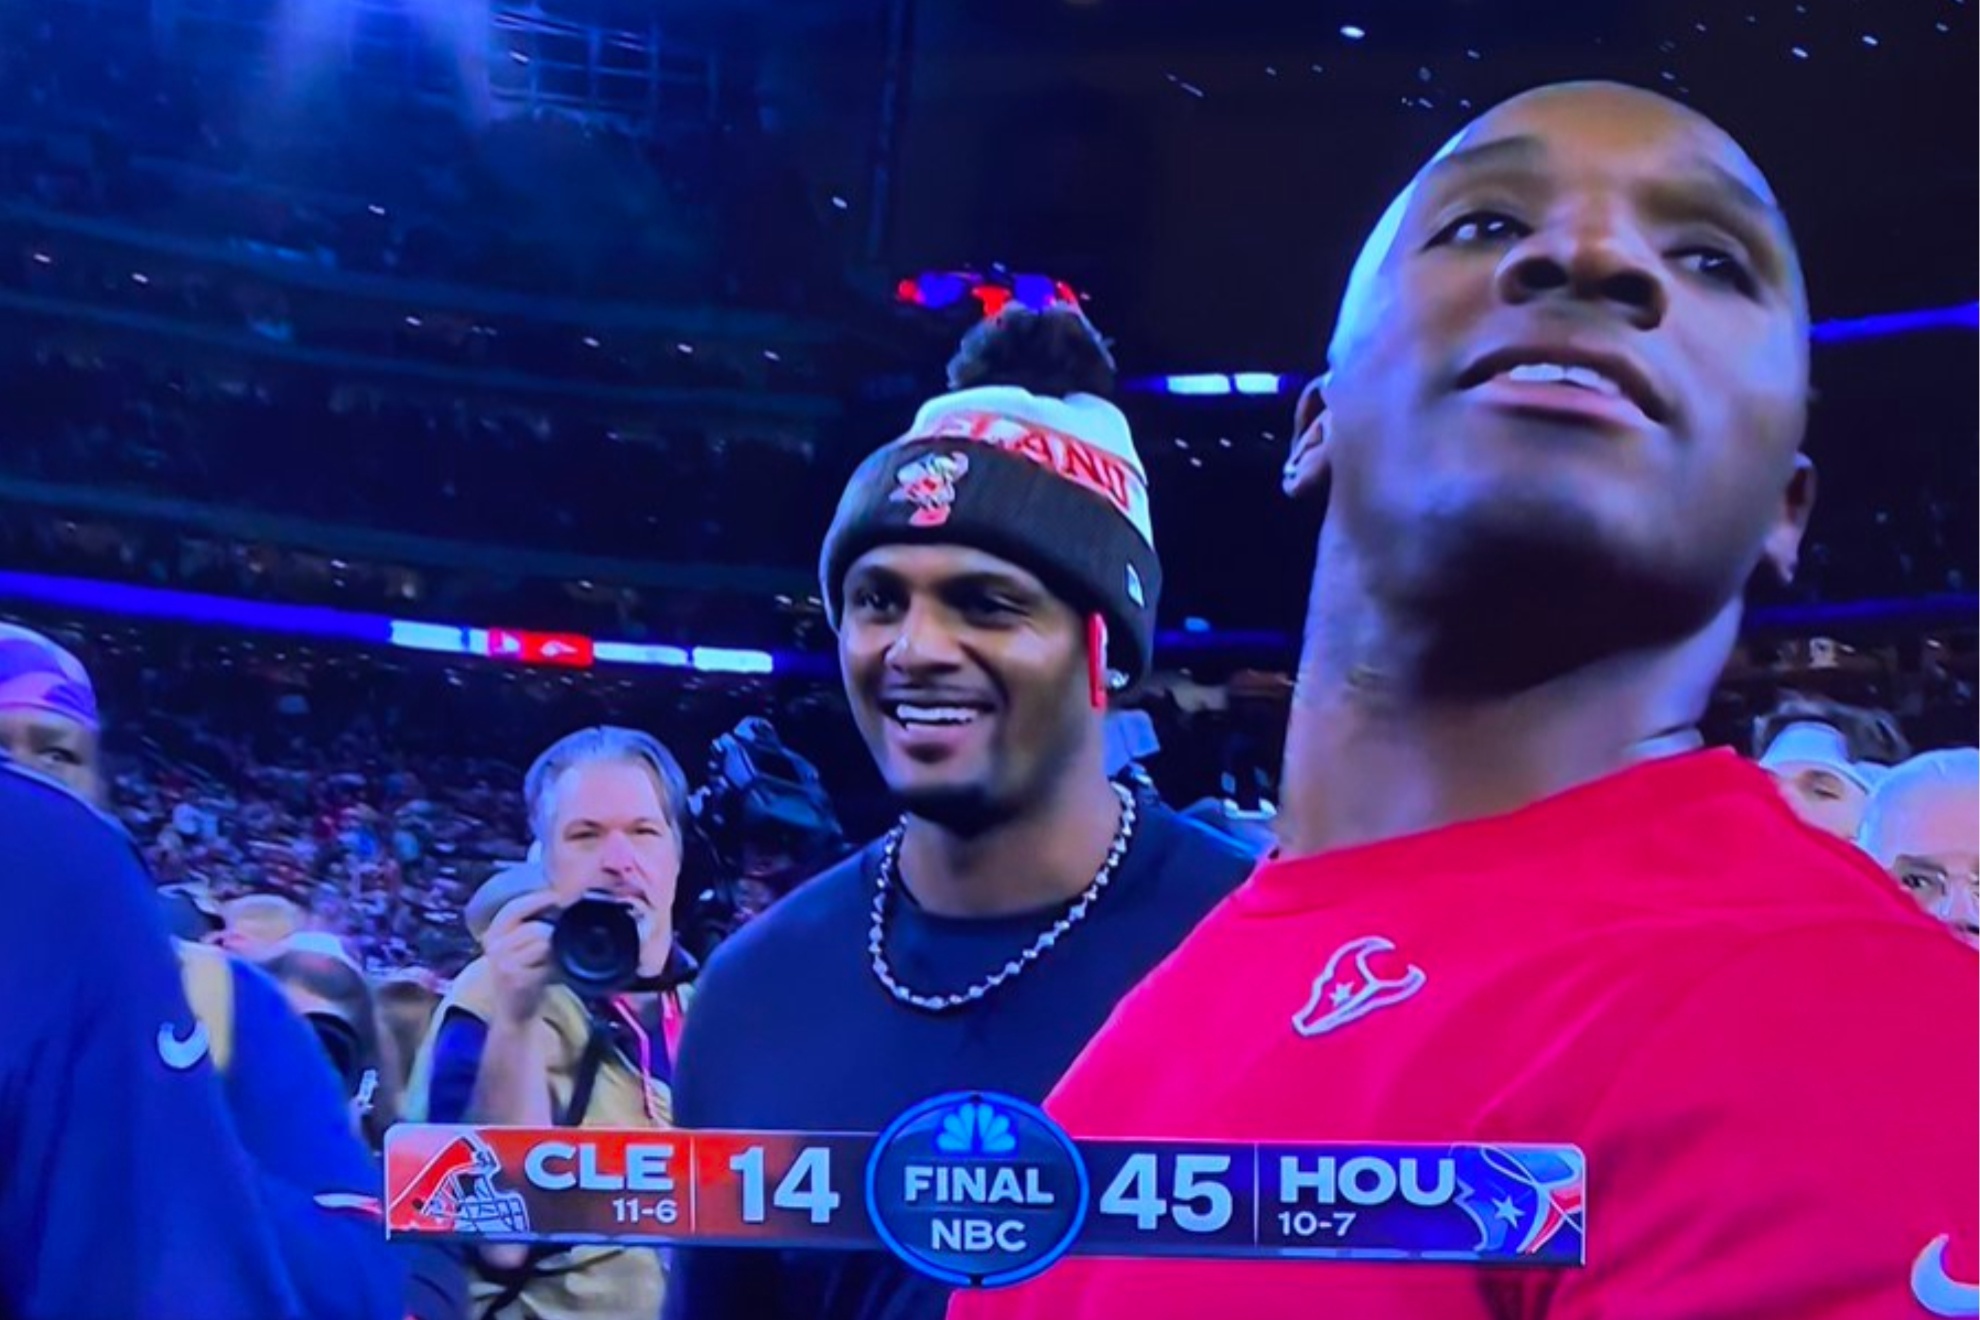 DeShaun Watson smiling after the defeat of his Cleveland Browns.